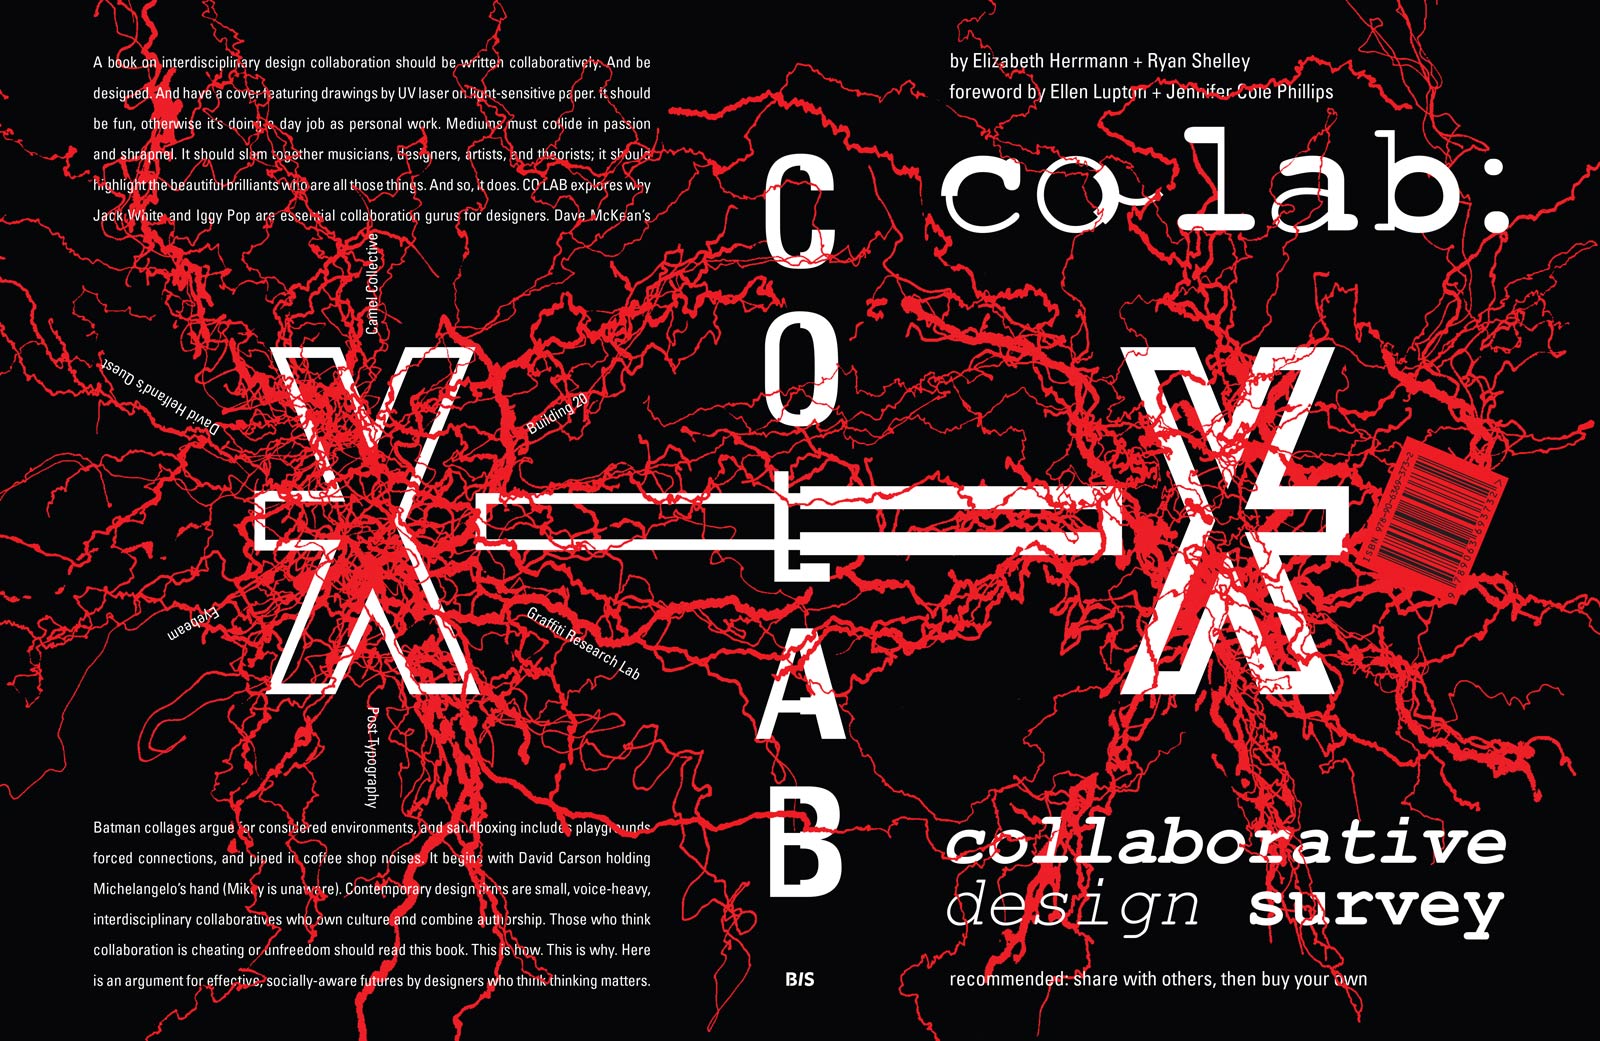 BGSUGD Faculty Ryan Shelley Publishes First Book, CO-LAB: Collaborative Design Survey